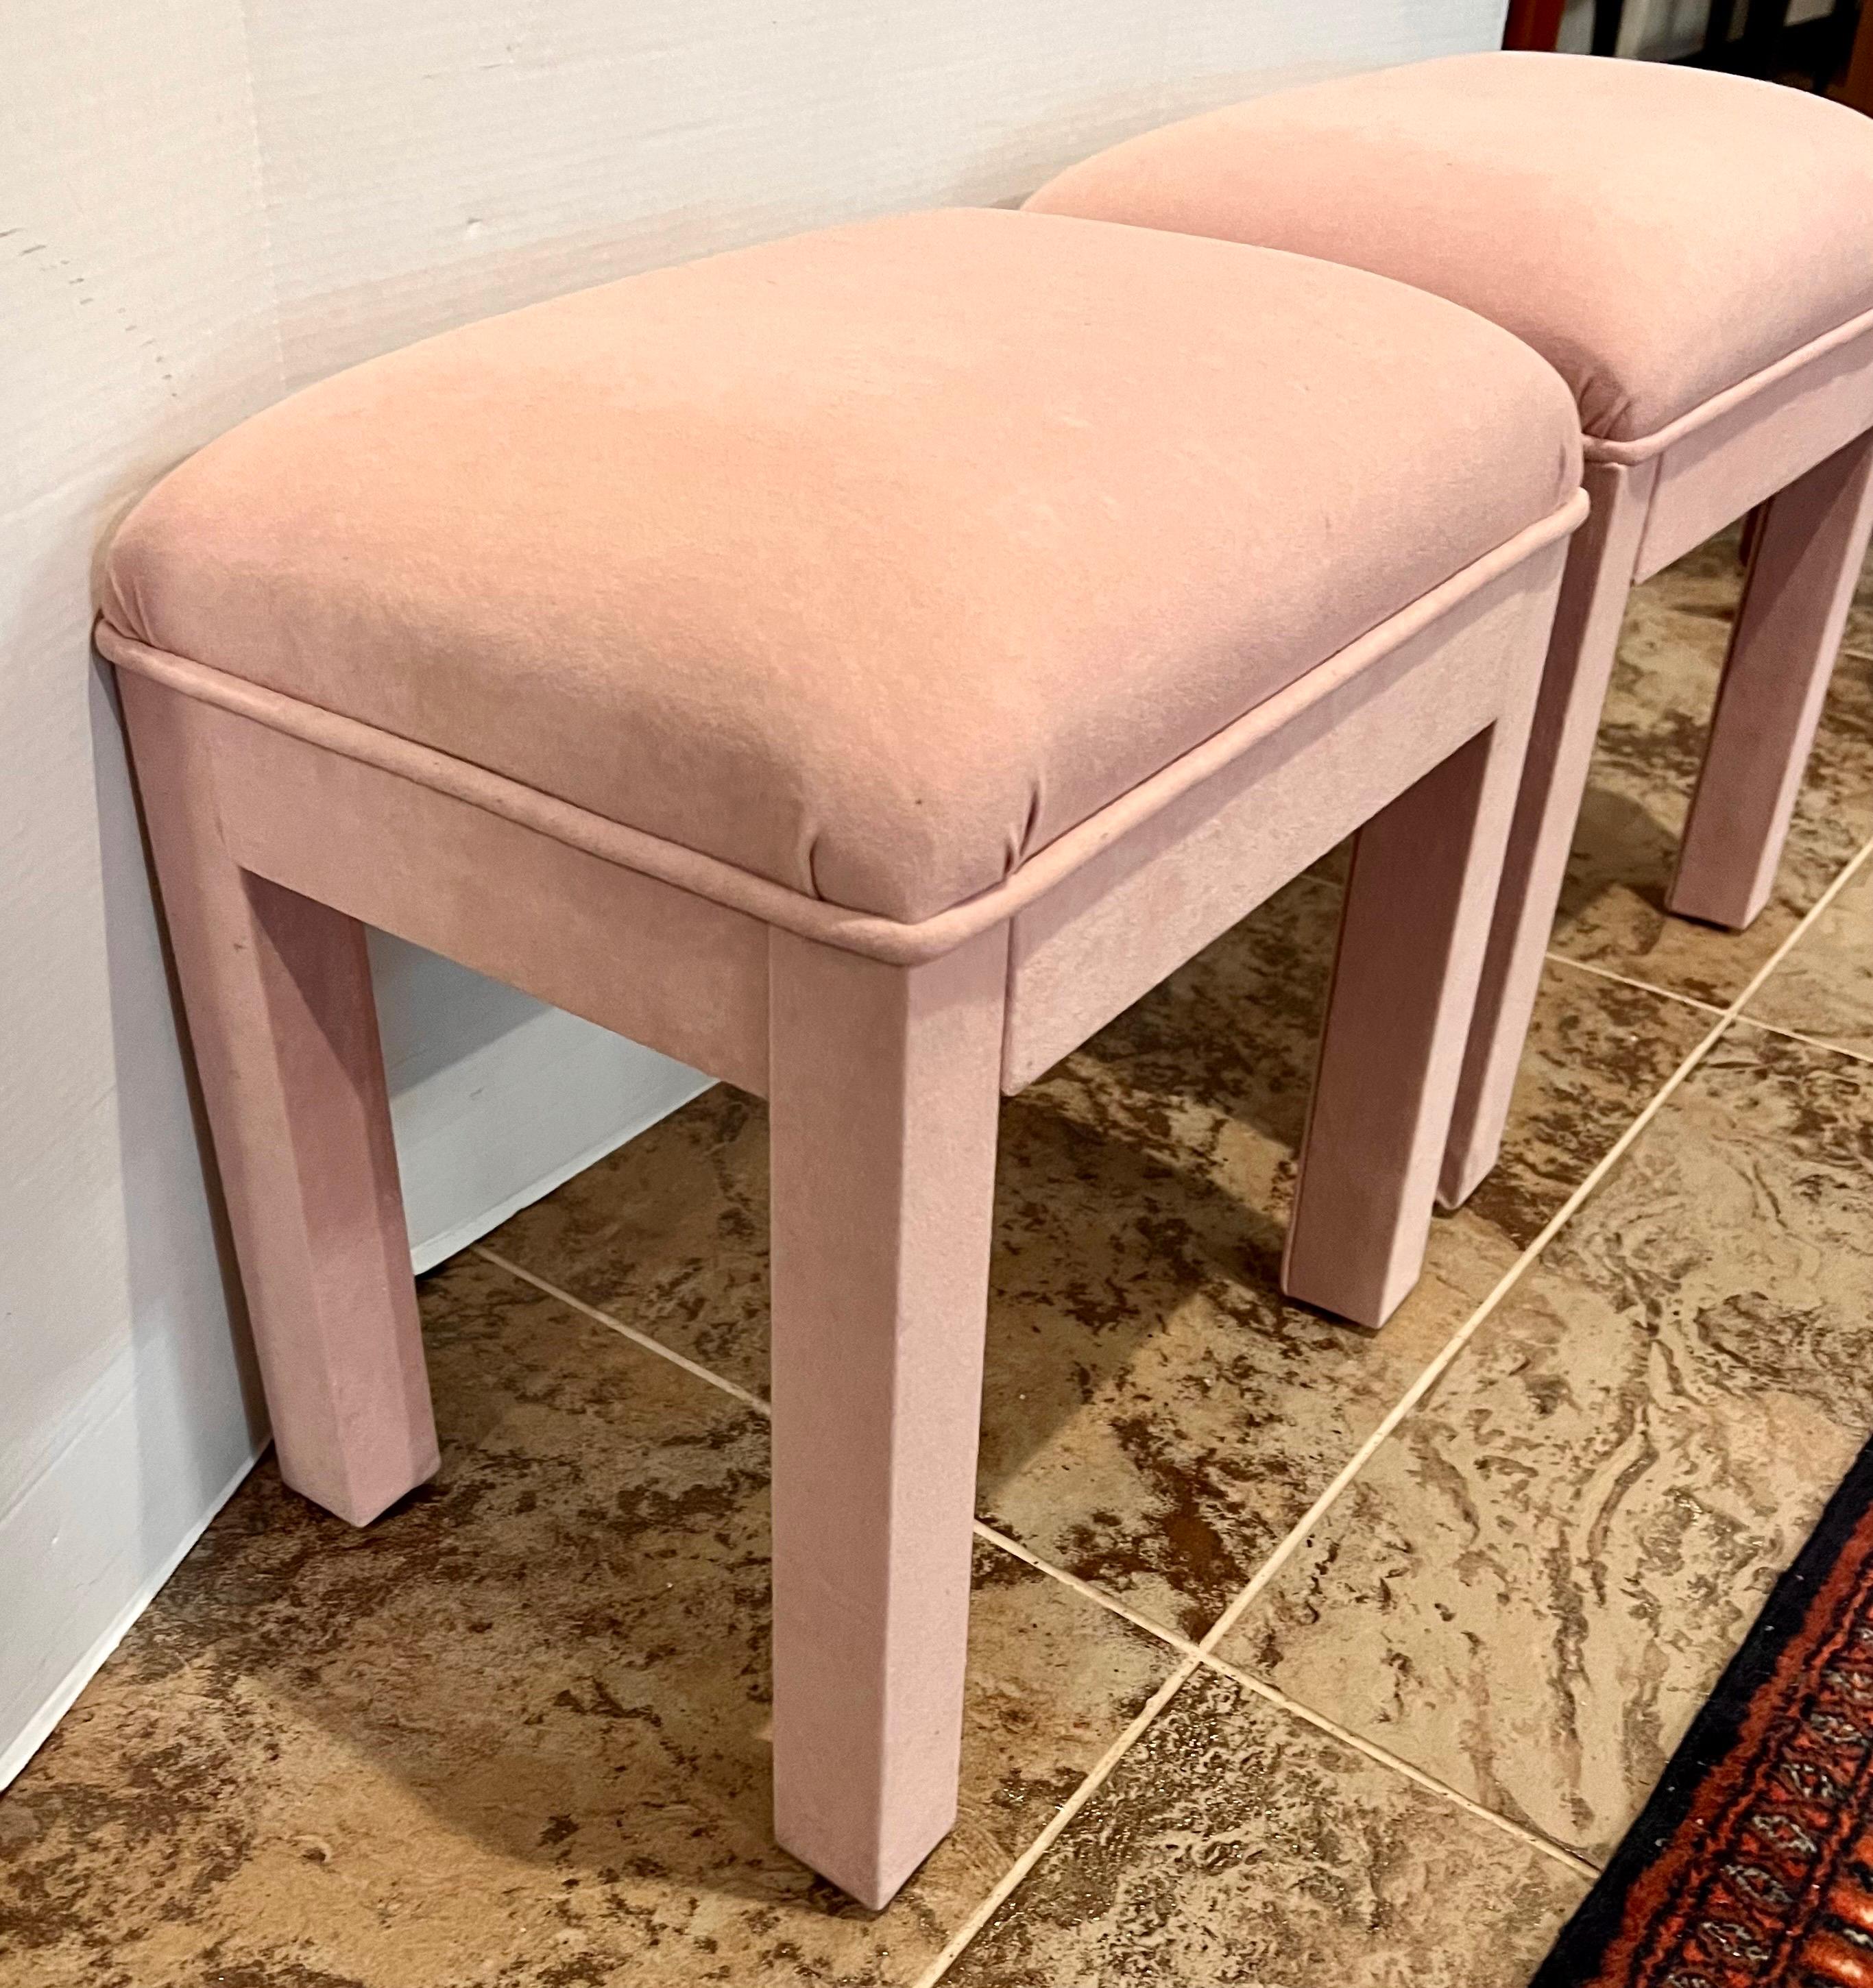 Pair of vintage parsons stools upholstered in a pink velvety fabric.
Great for extra seating and adding style to your space.